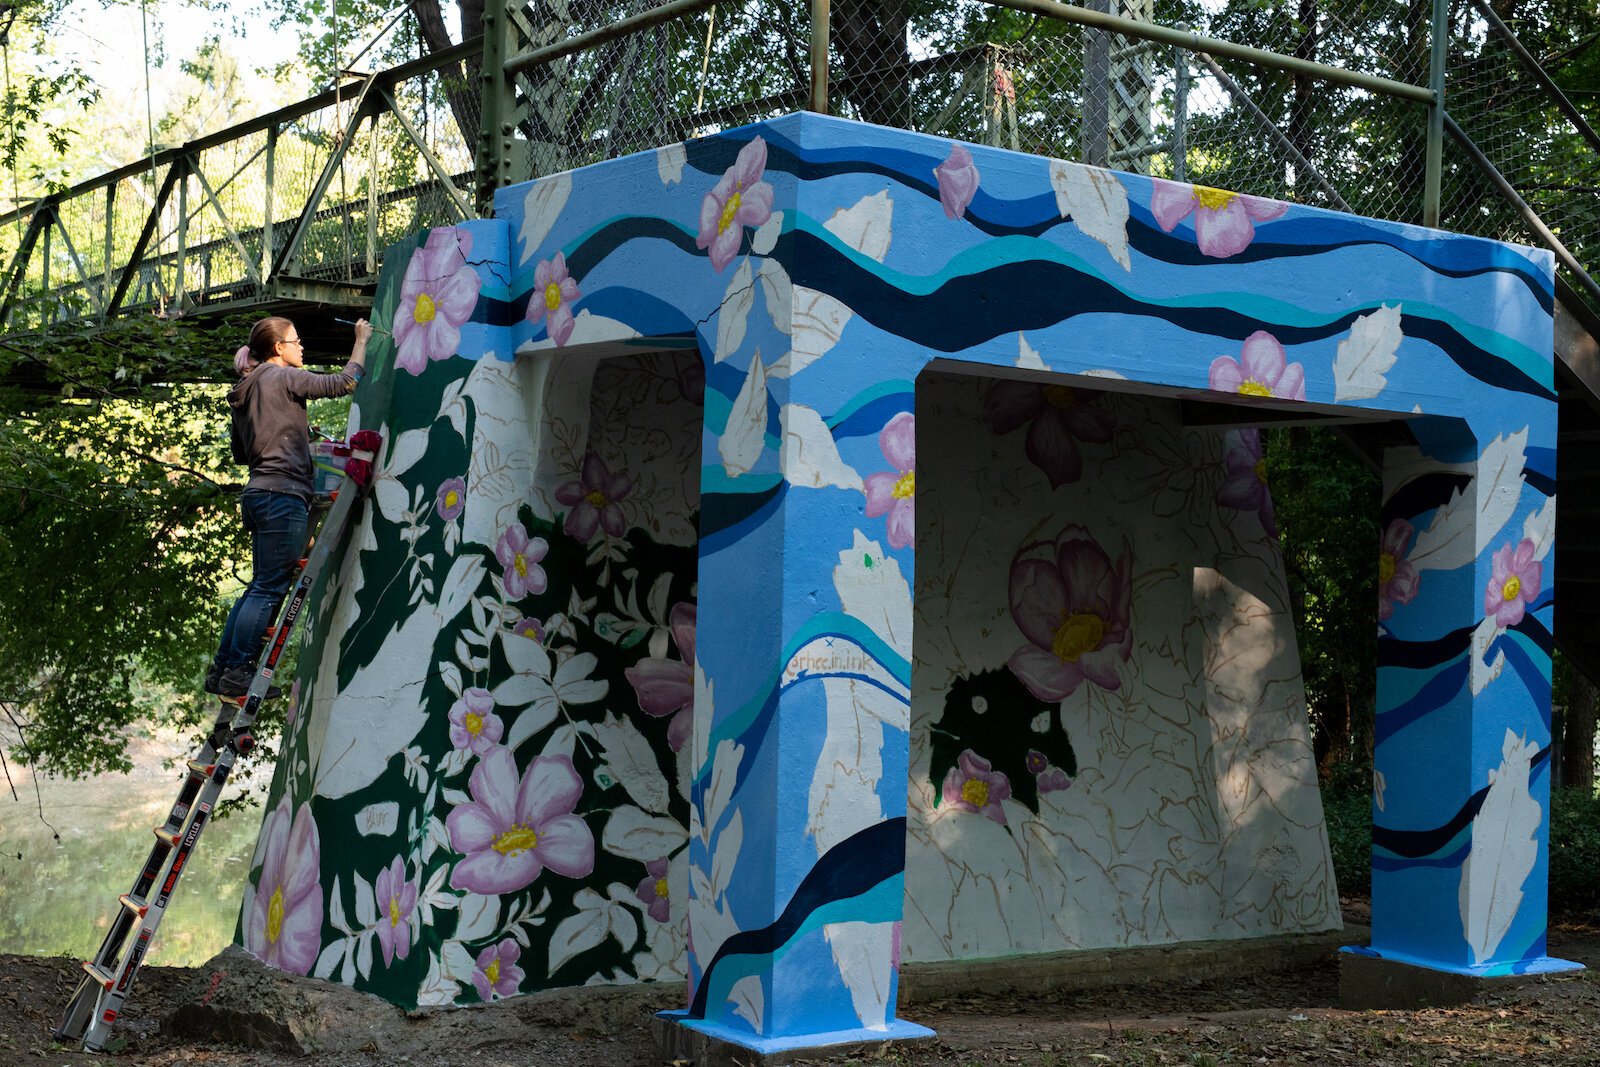 A portion of Suzanne Rhee's mural work in Foster Park.